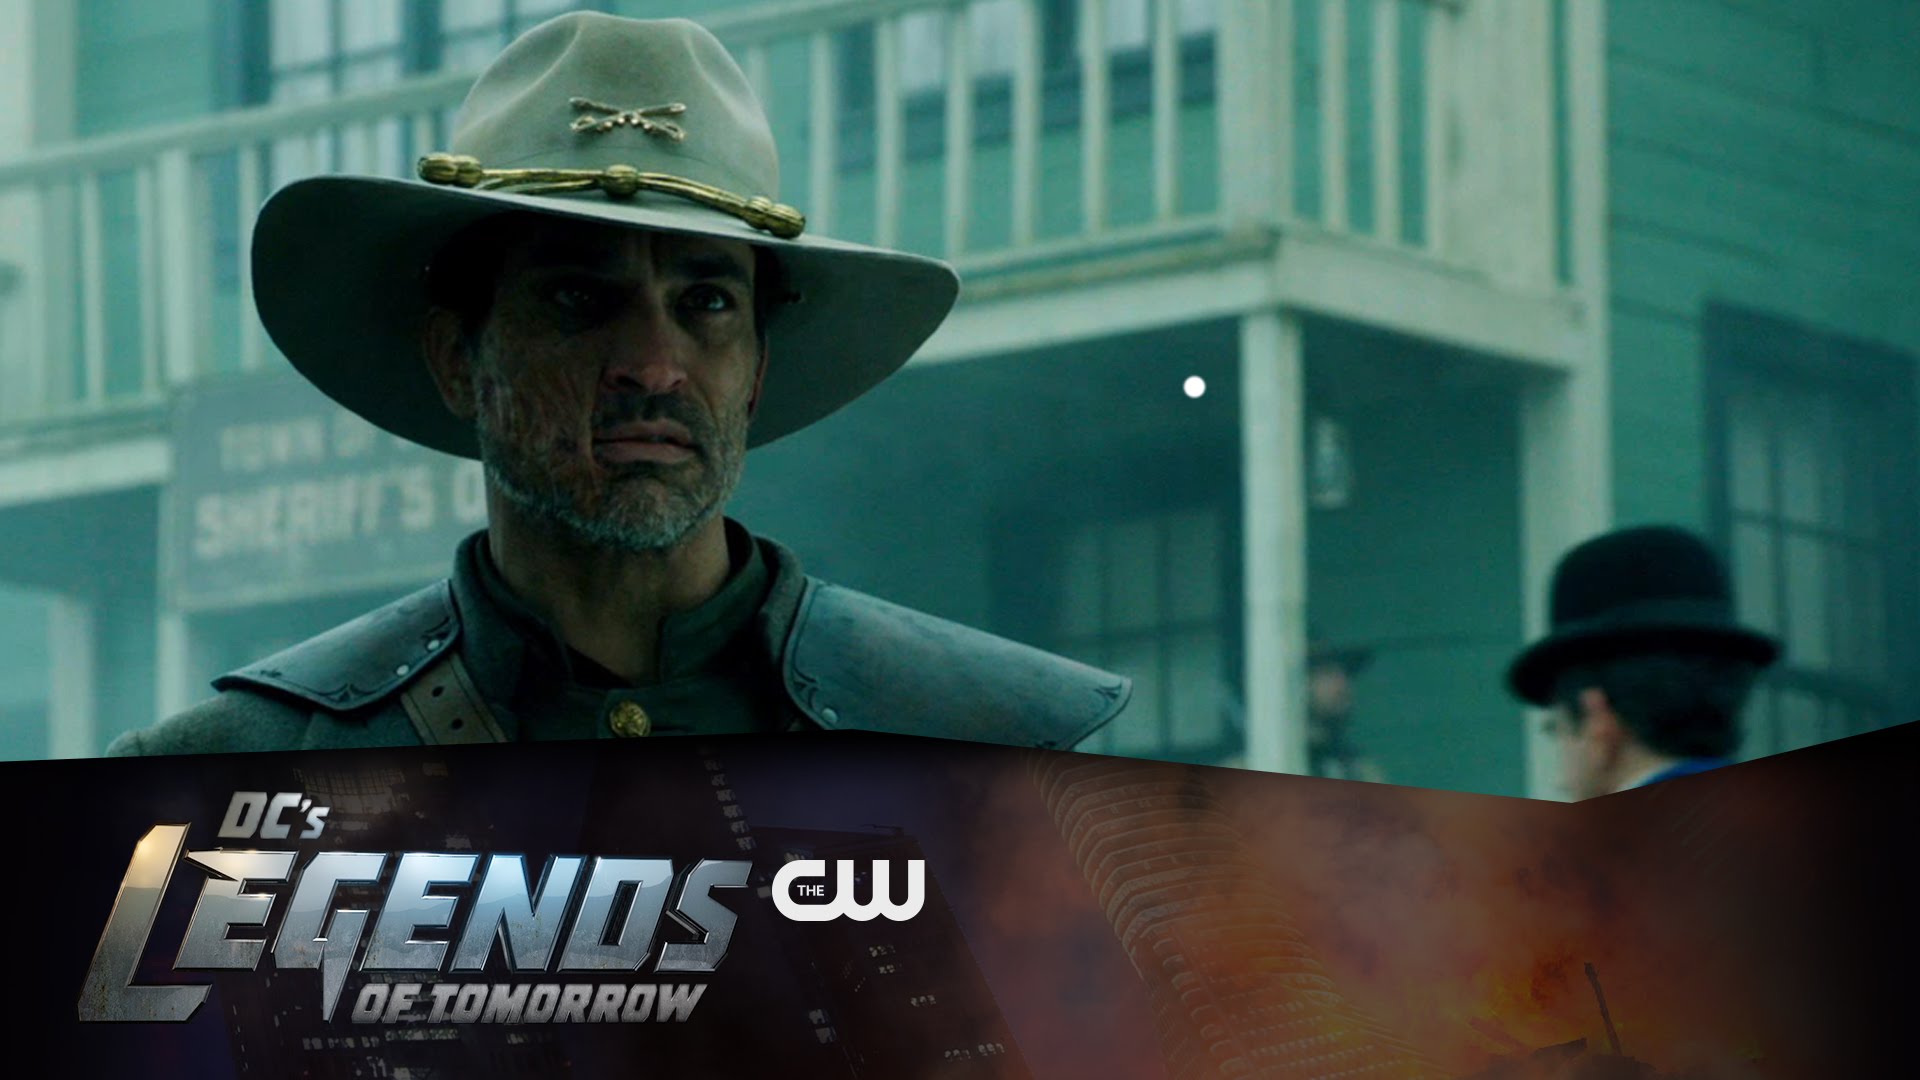 DC’s Legends of Tomorrow 1.11- “Magnificent Eight”